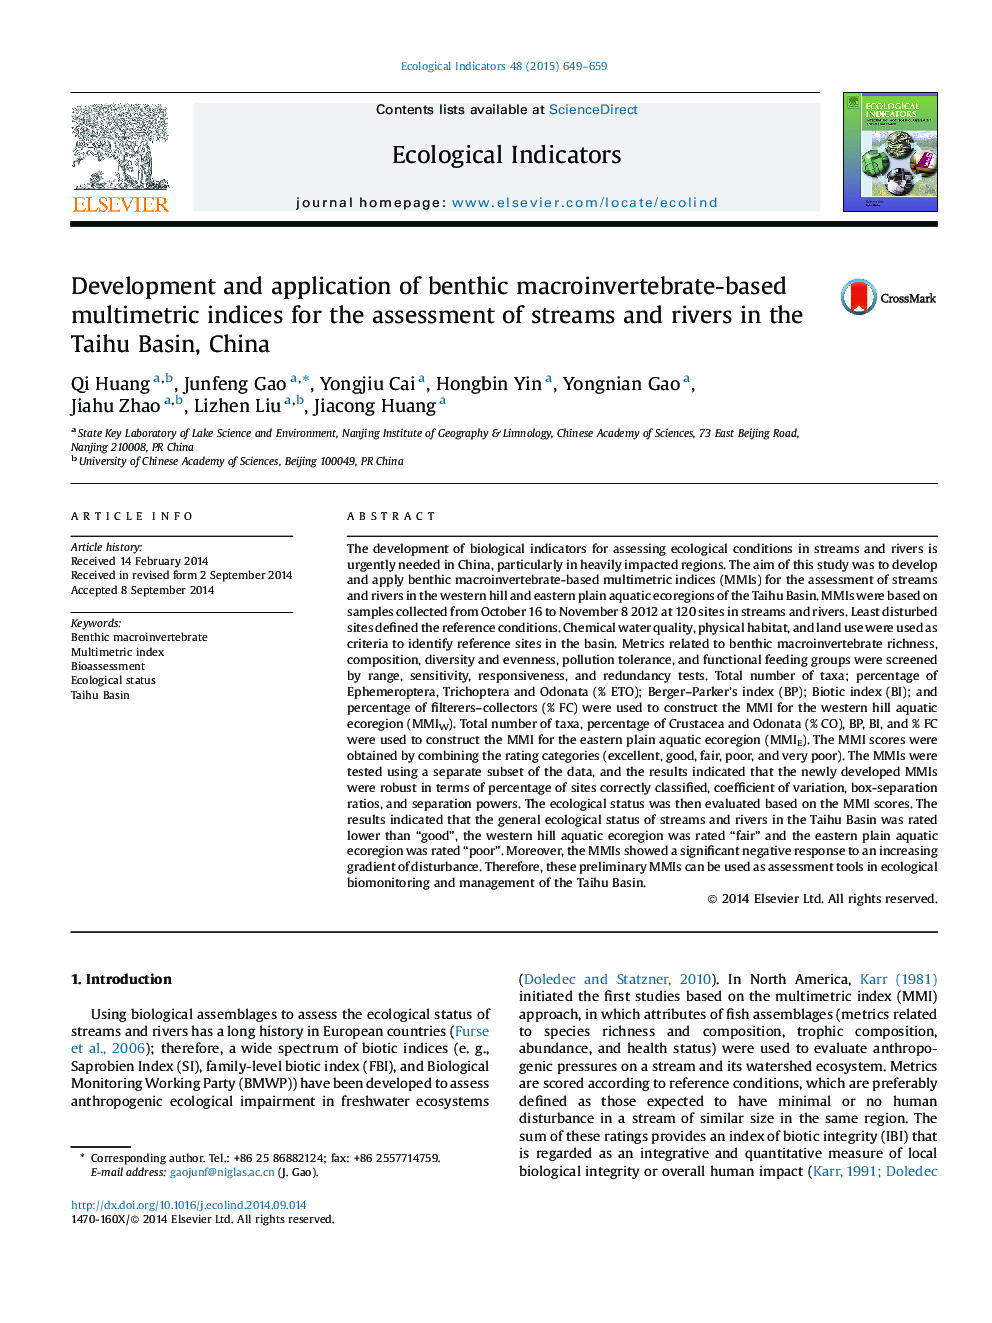 Development and application of benthic macroinvertebrate-based multimetric indices for the assessment of streams and rivers in the Taihu Basin, China